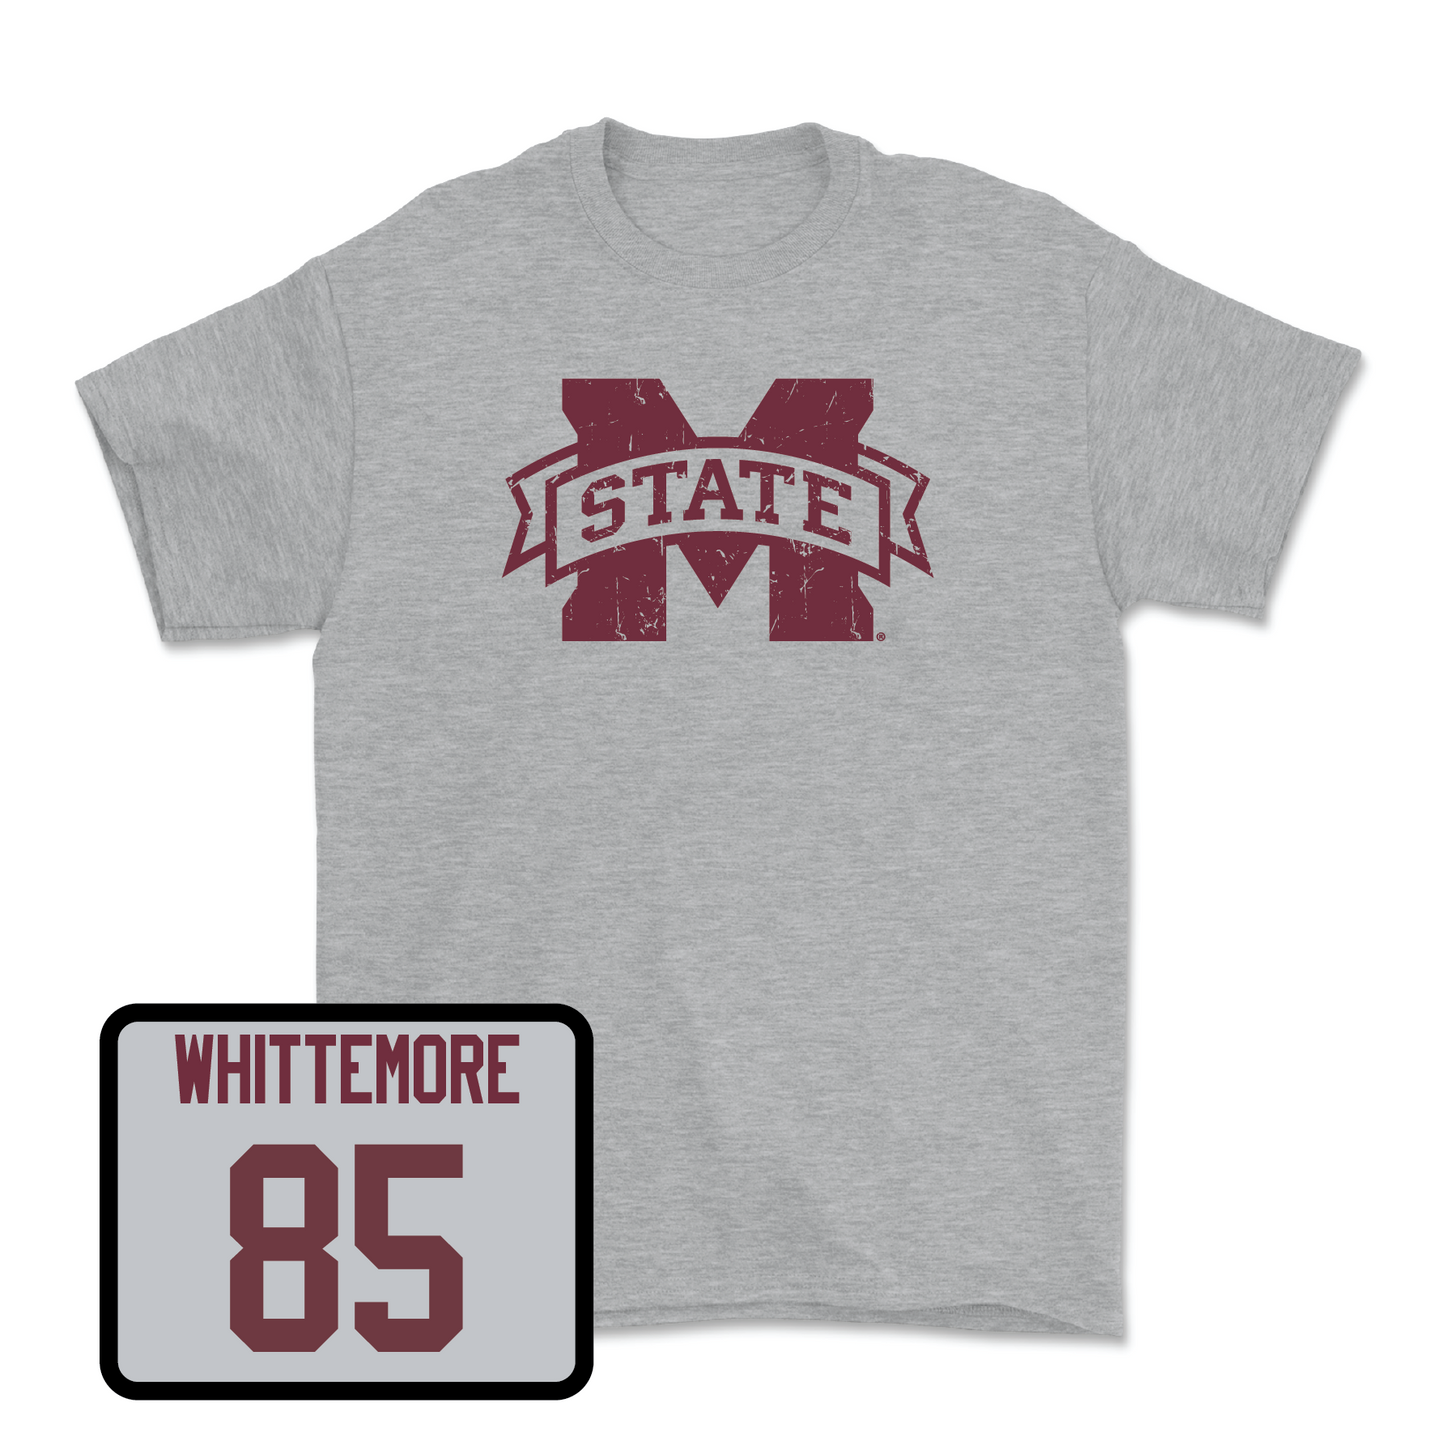 Sport Grey Football Classic Tee X-Large / Creed Whittemore | #85